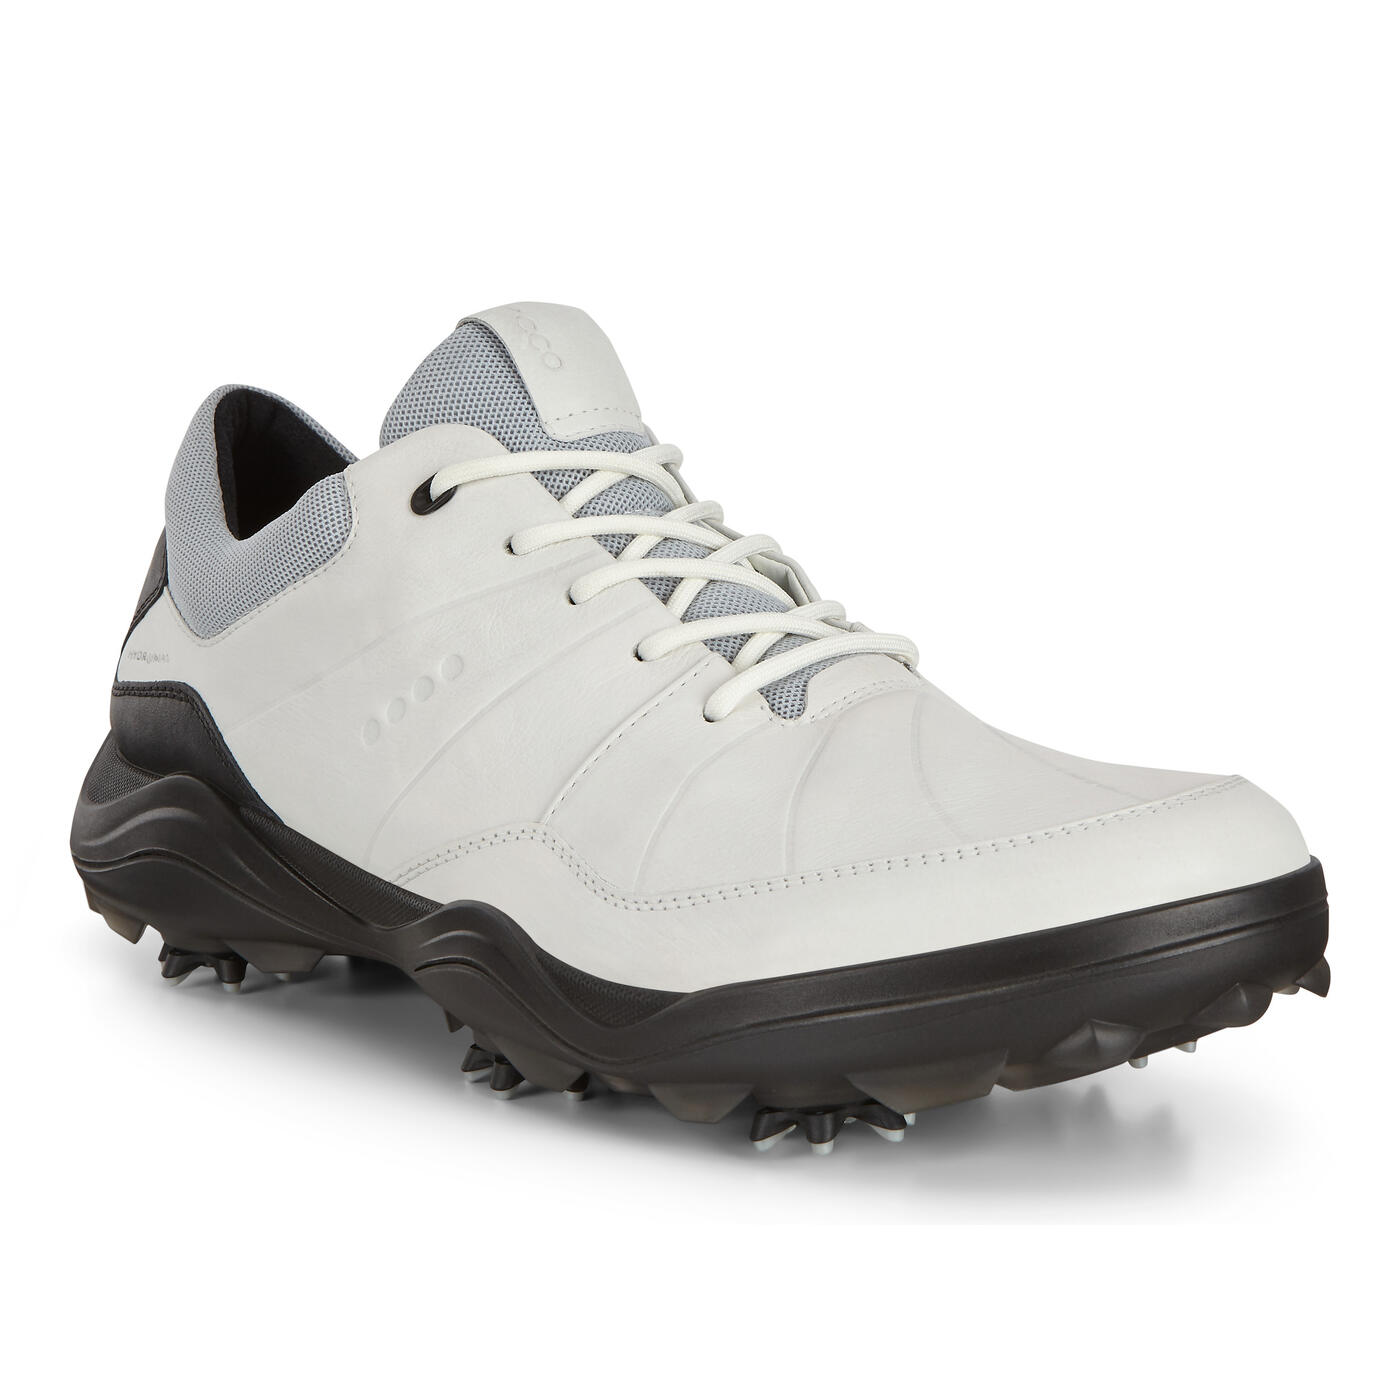 ECCO Men's Cleated Golf Strike Shoes | Men's Cleated Golf Shoes | ECCO ...